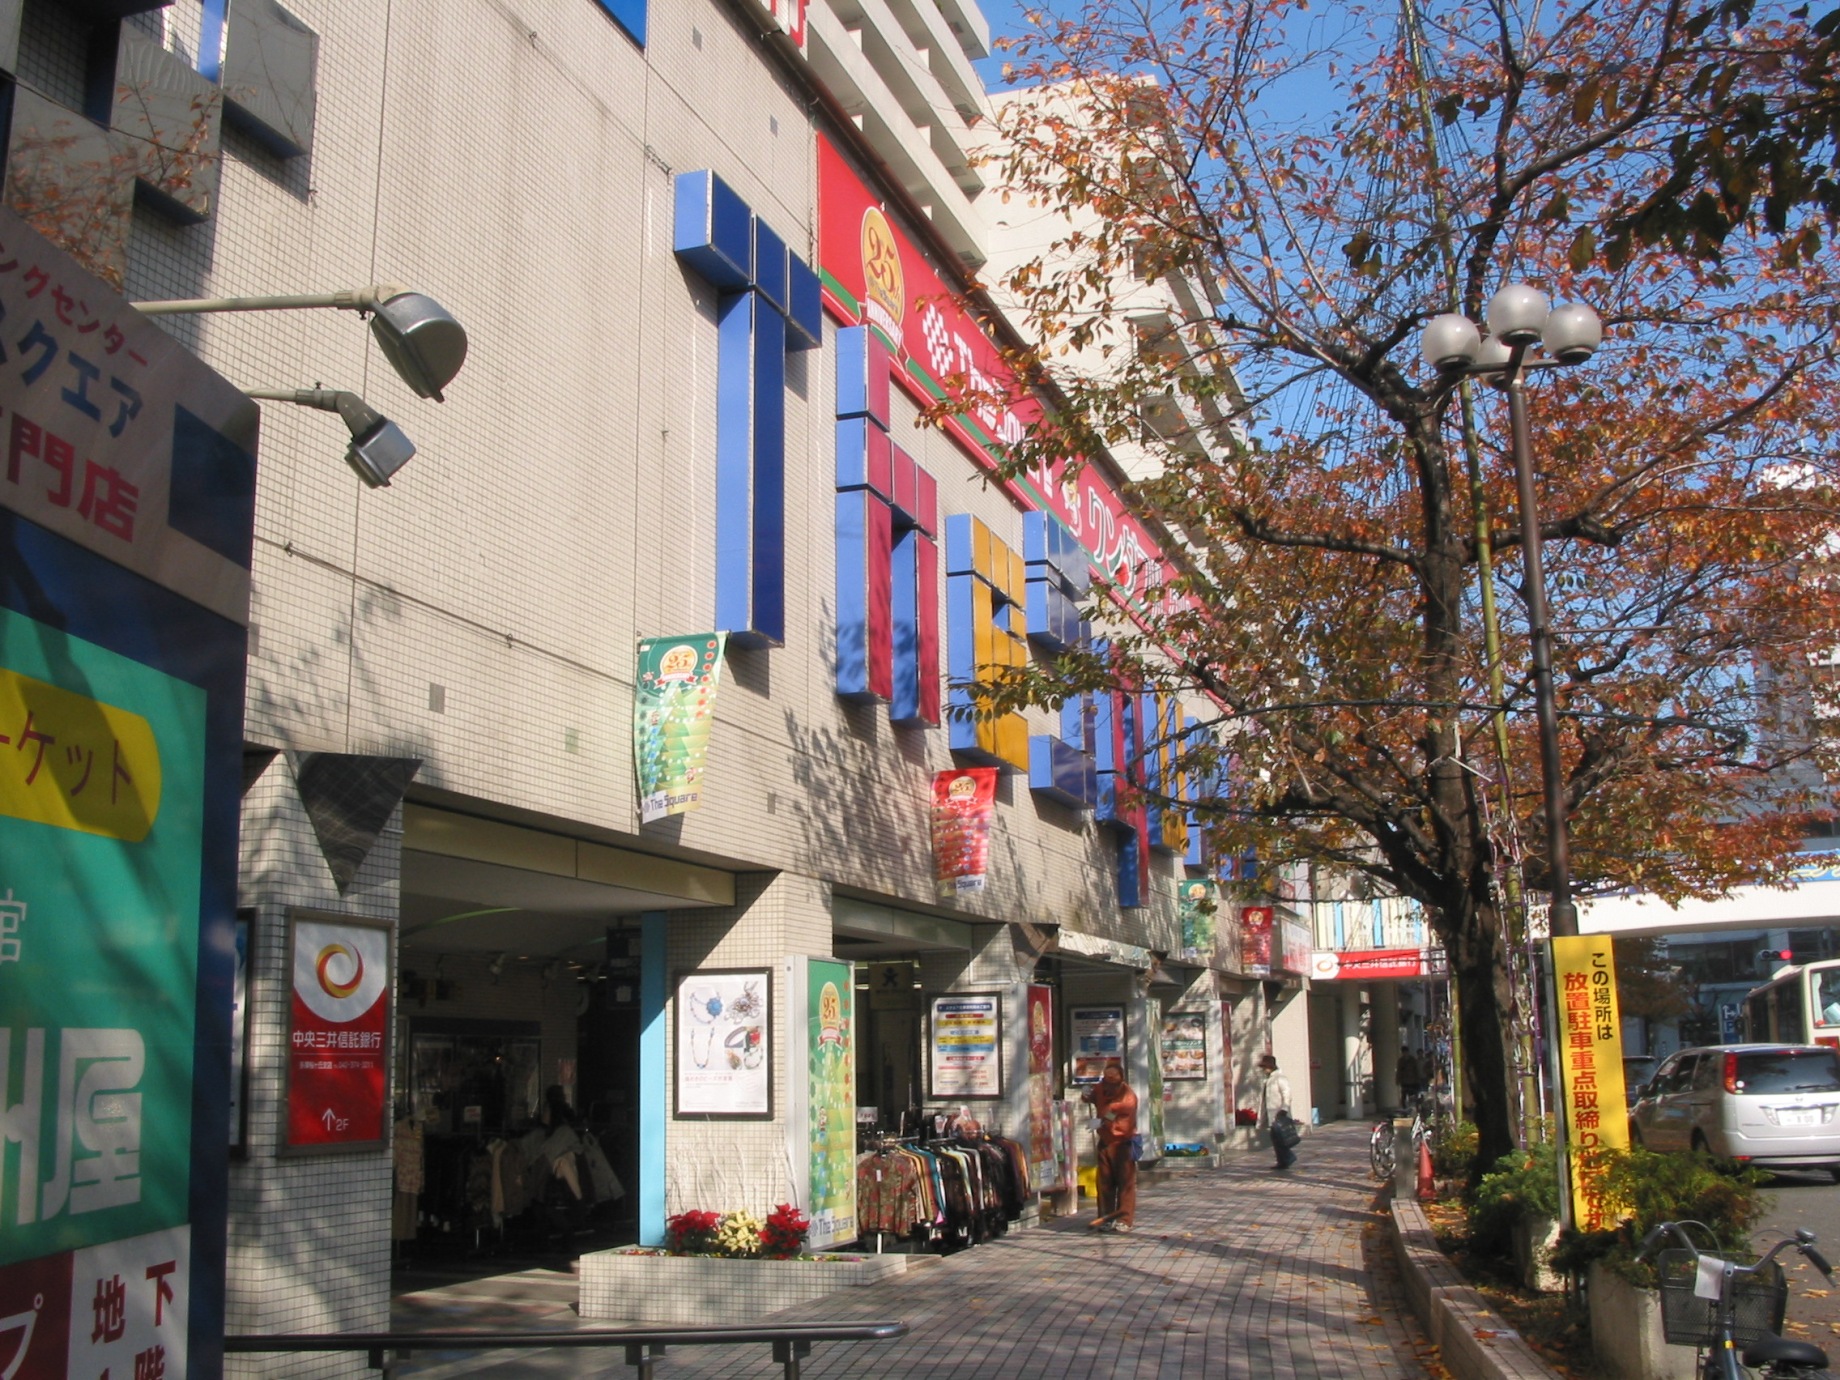 Shopping centre. The ・ 772m until the Square (shopping center)